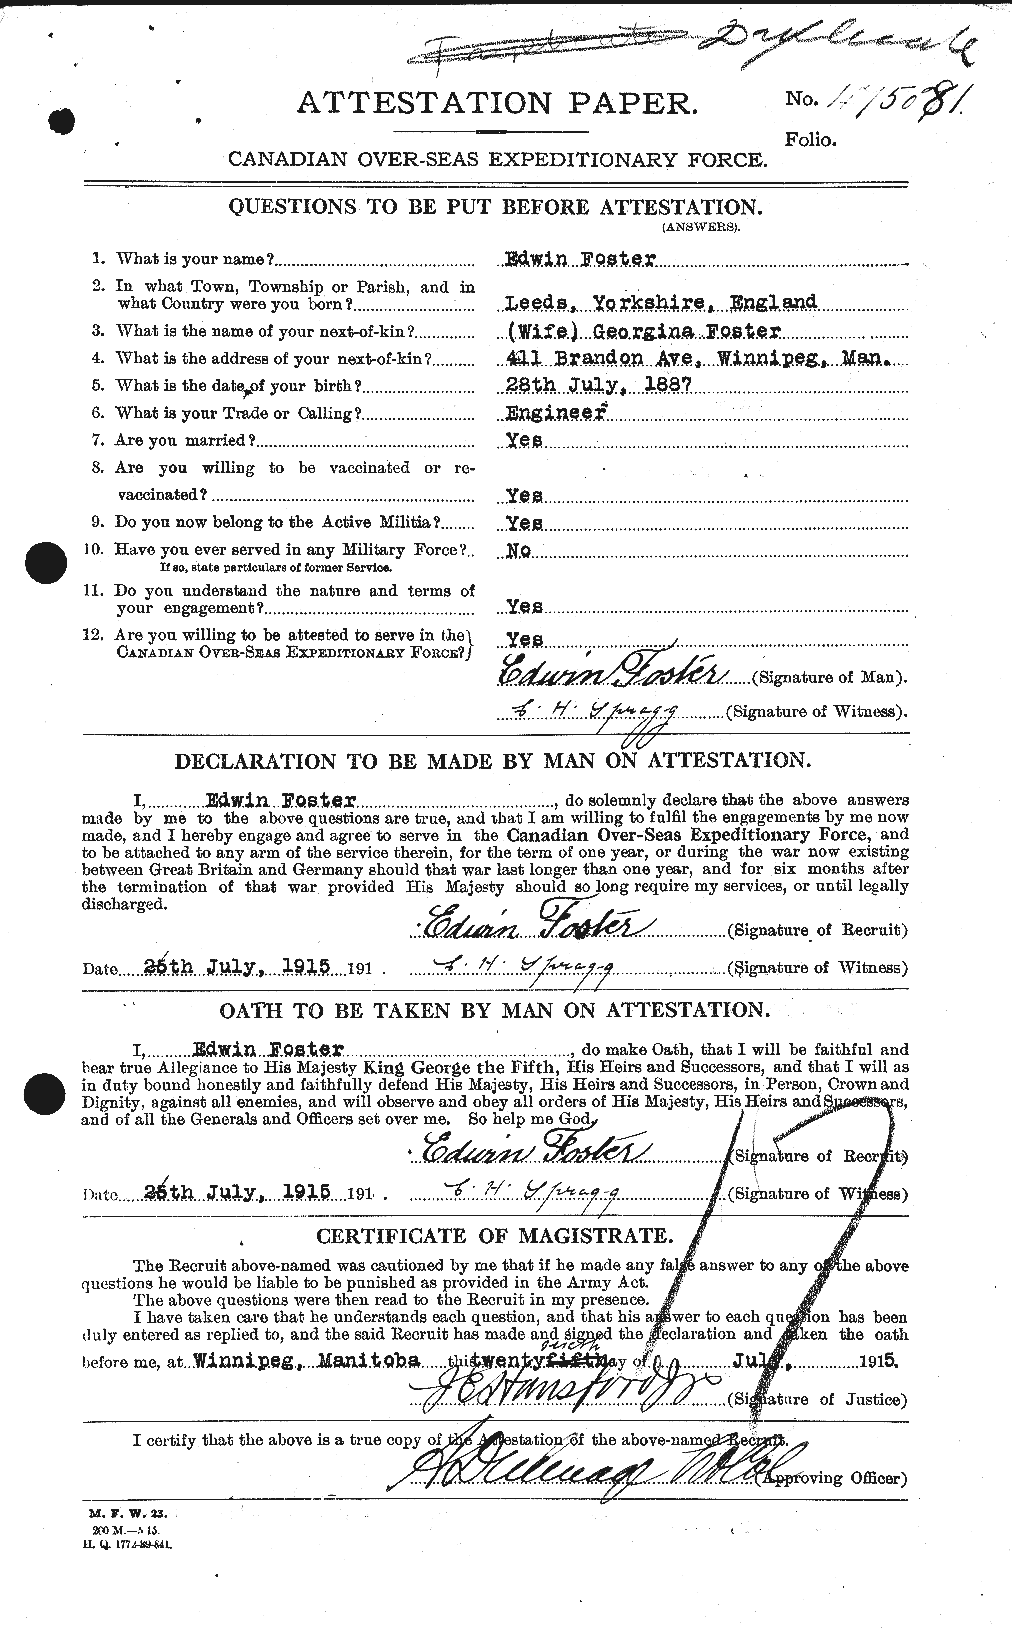 Personnel Records of the First World War - CEF 330588a